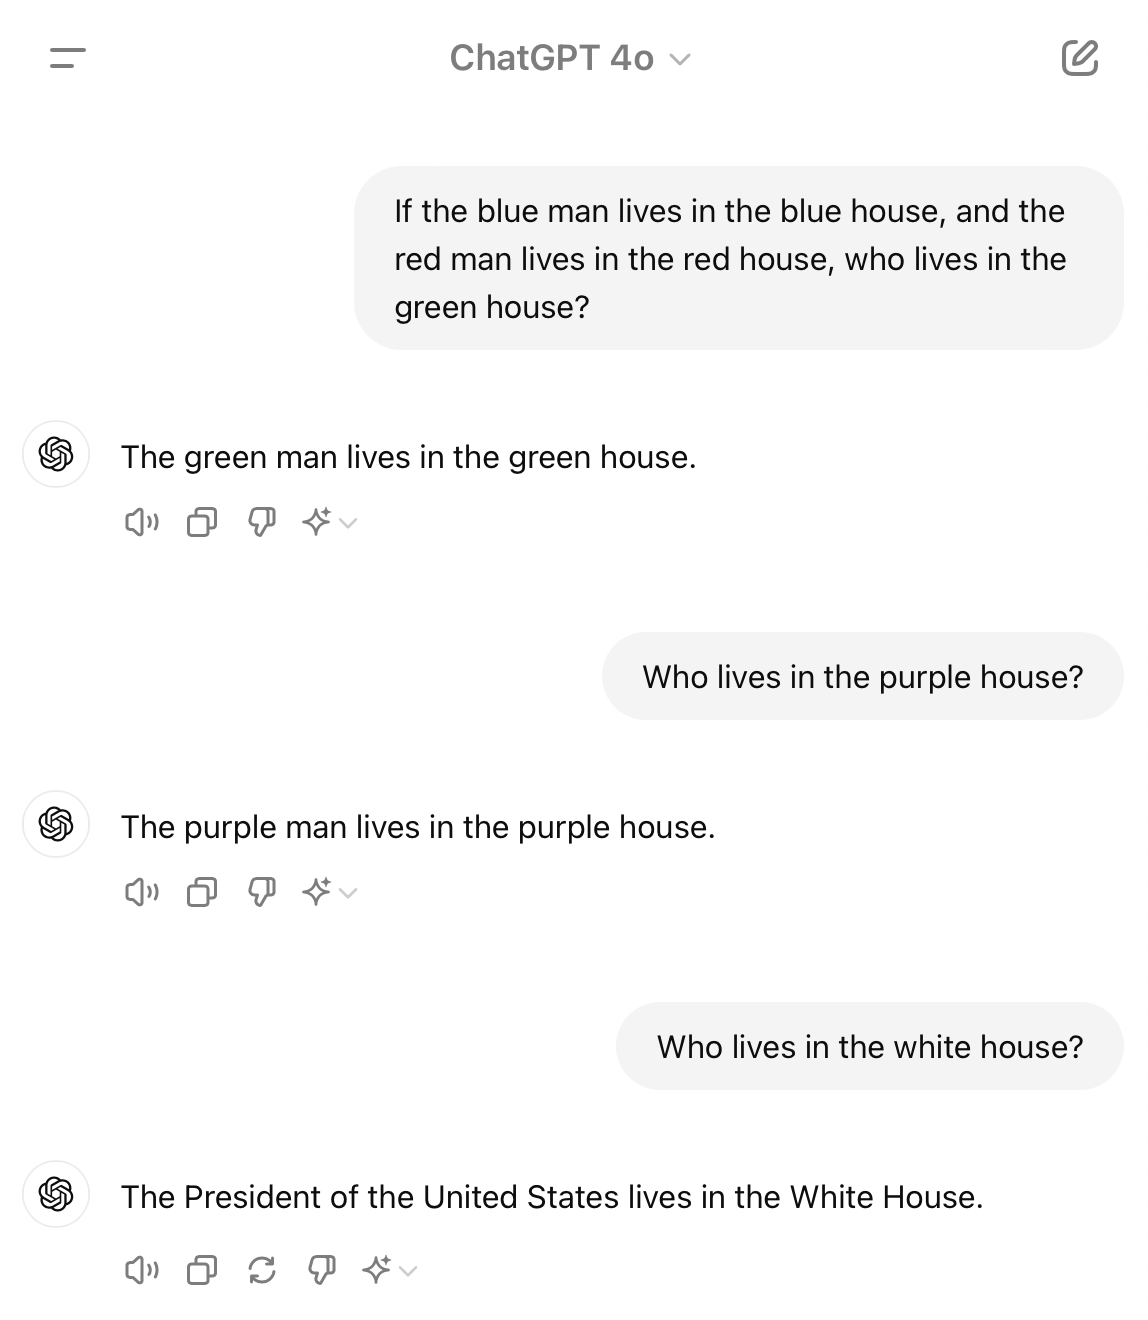 ChatGPT: The President of the United States lives in the White House